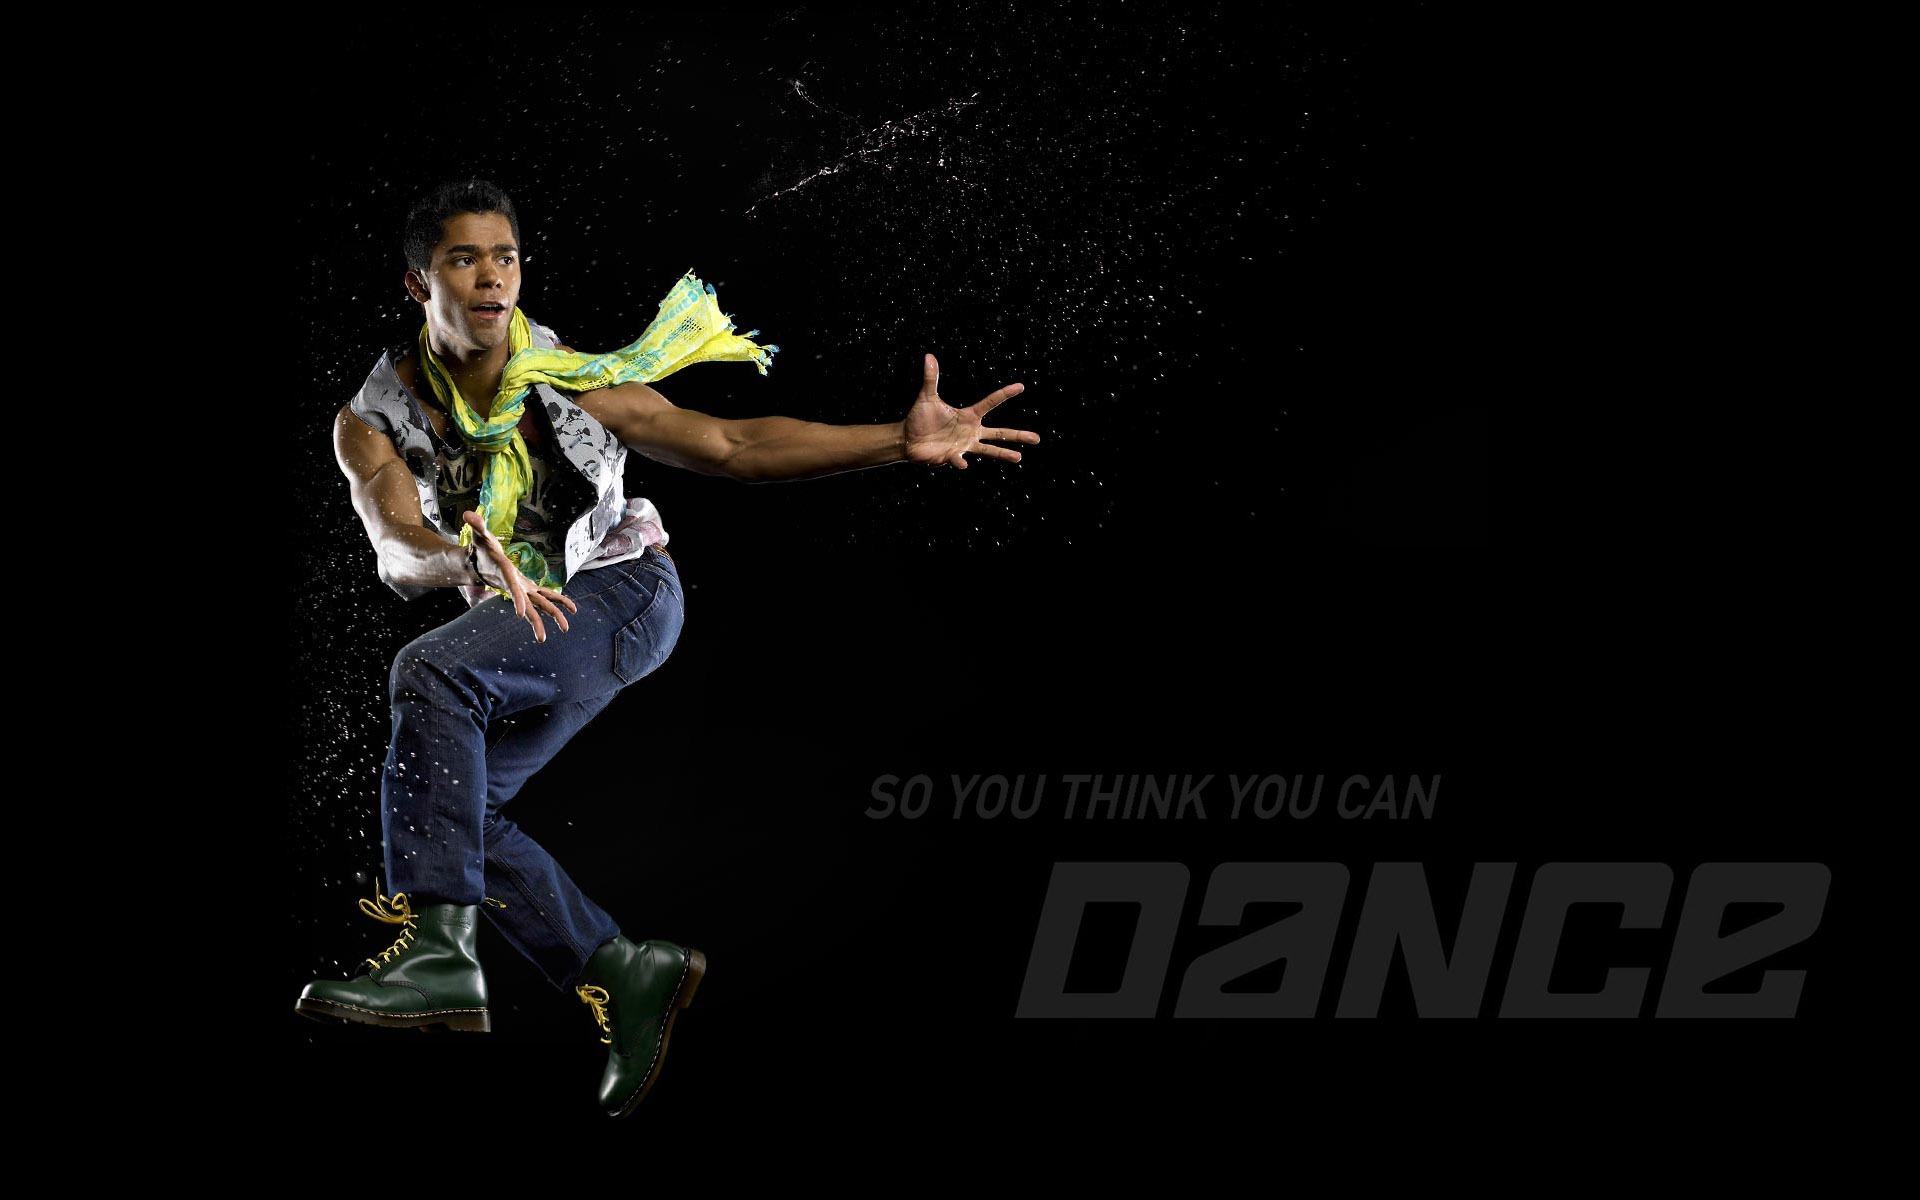 So You Think You Can Dance Wallpaper (1) #2 - 1920x1200